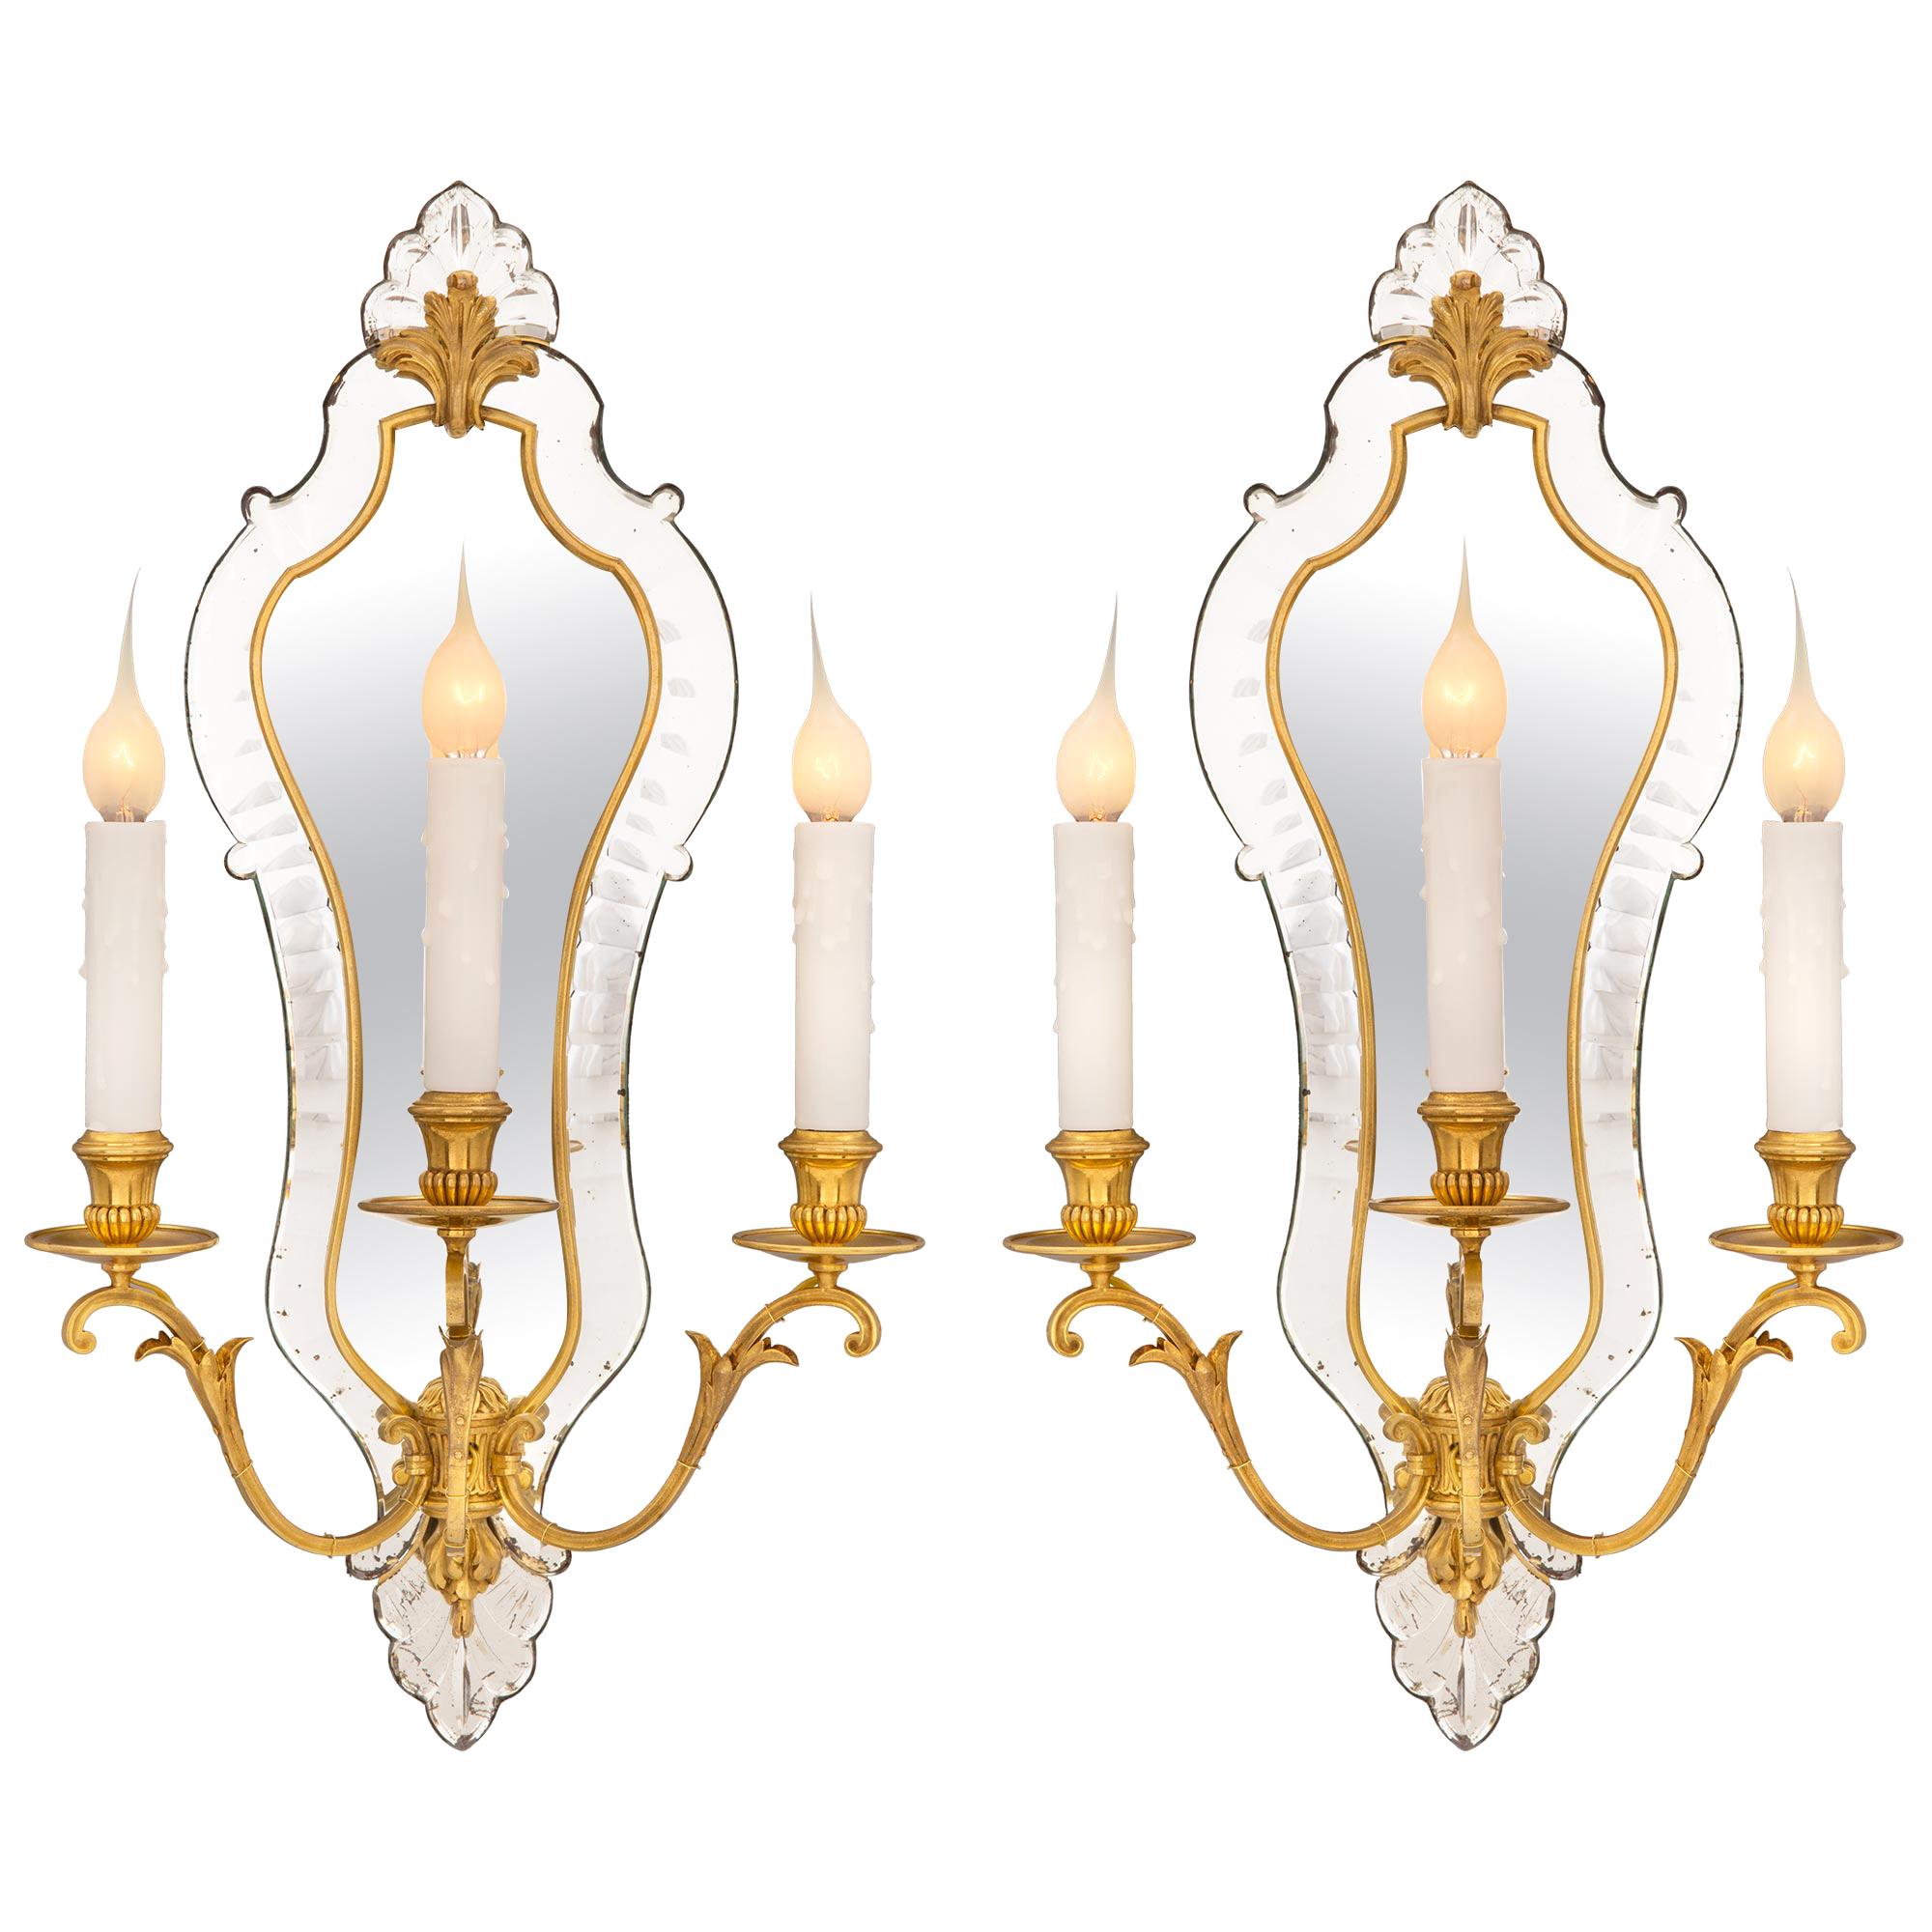 Pair of French Turn-of-the-Century Venetian Style Ormolu and Mirrored Sconces